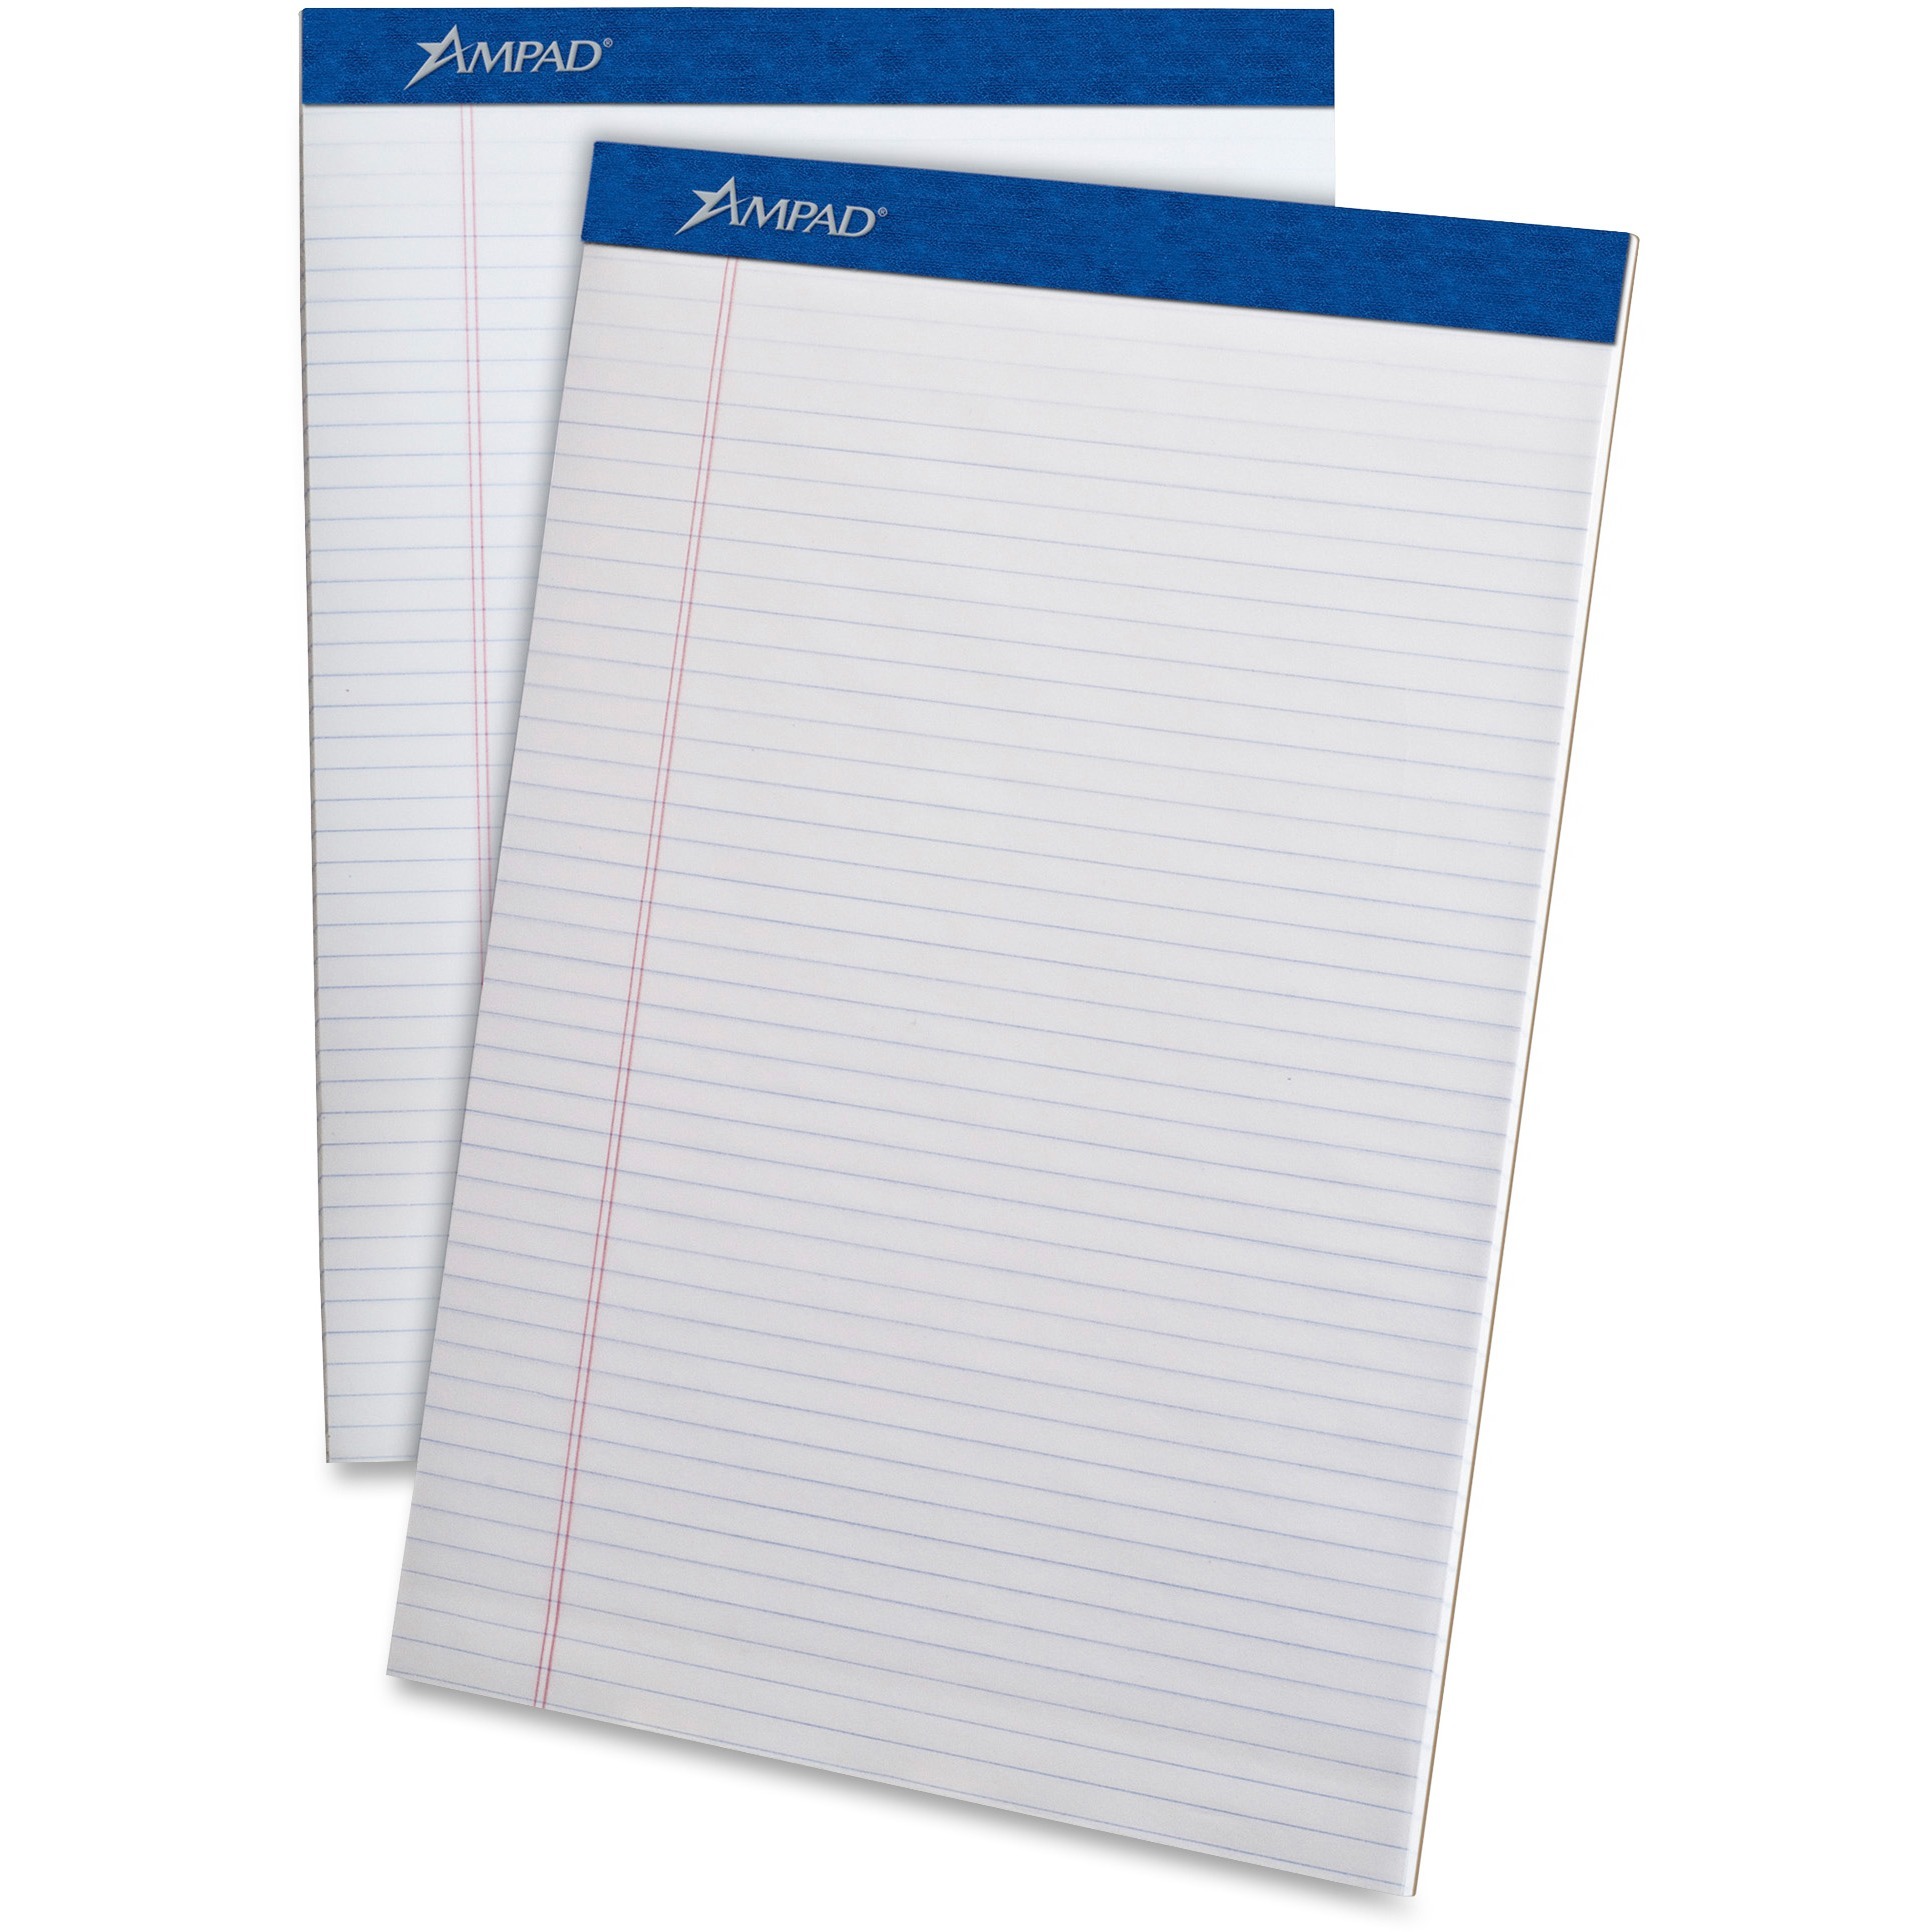 Ampad Perforated Ruled Pads - Letter - 50 Sheets - Stapled - 0.25" Ruled - 20 lb Basis Weight - Letter - 8 1/2" x 11"8.5" x 11.8